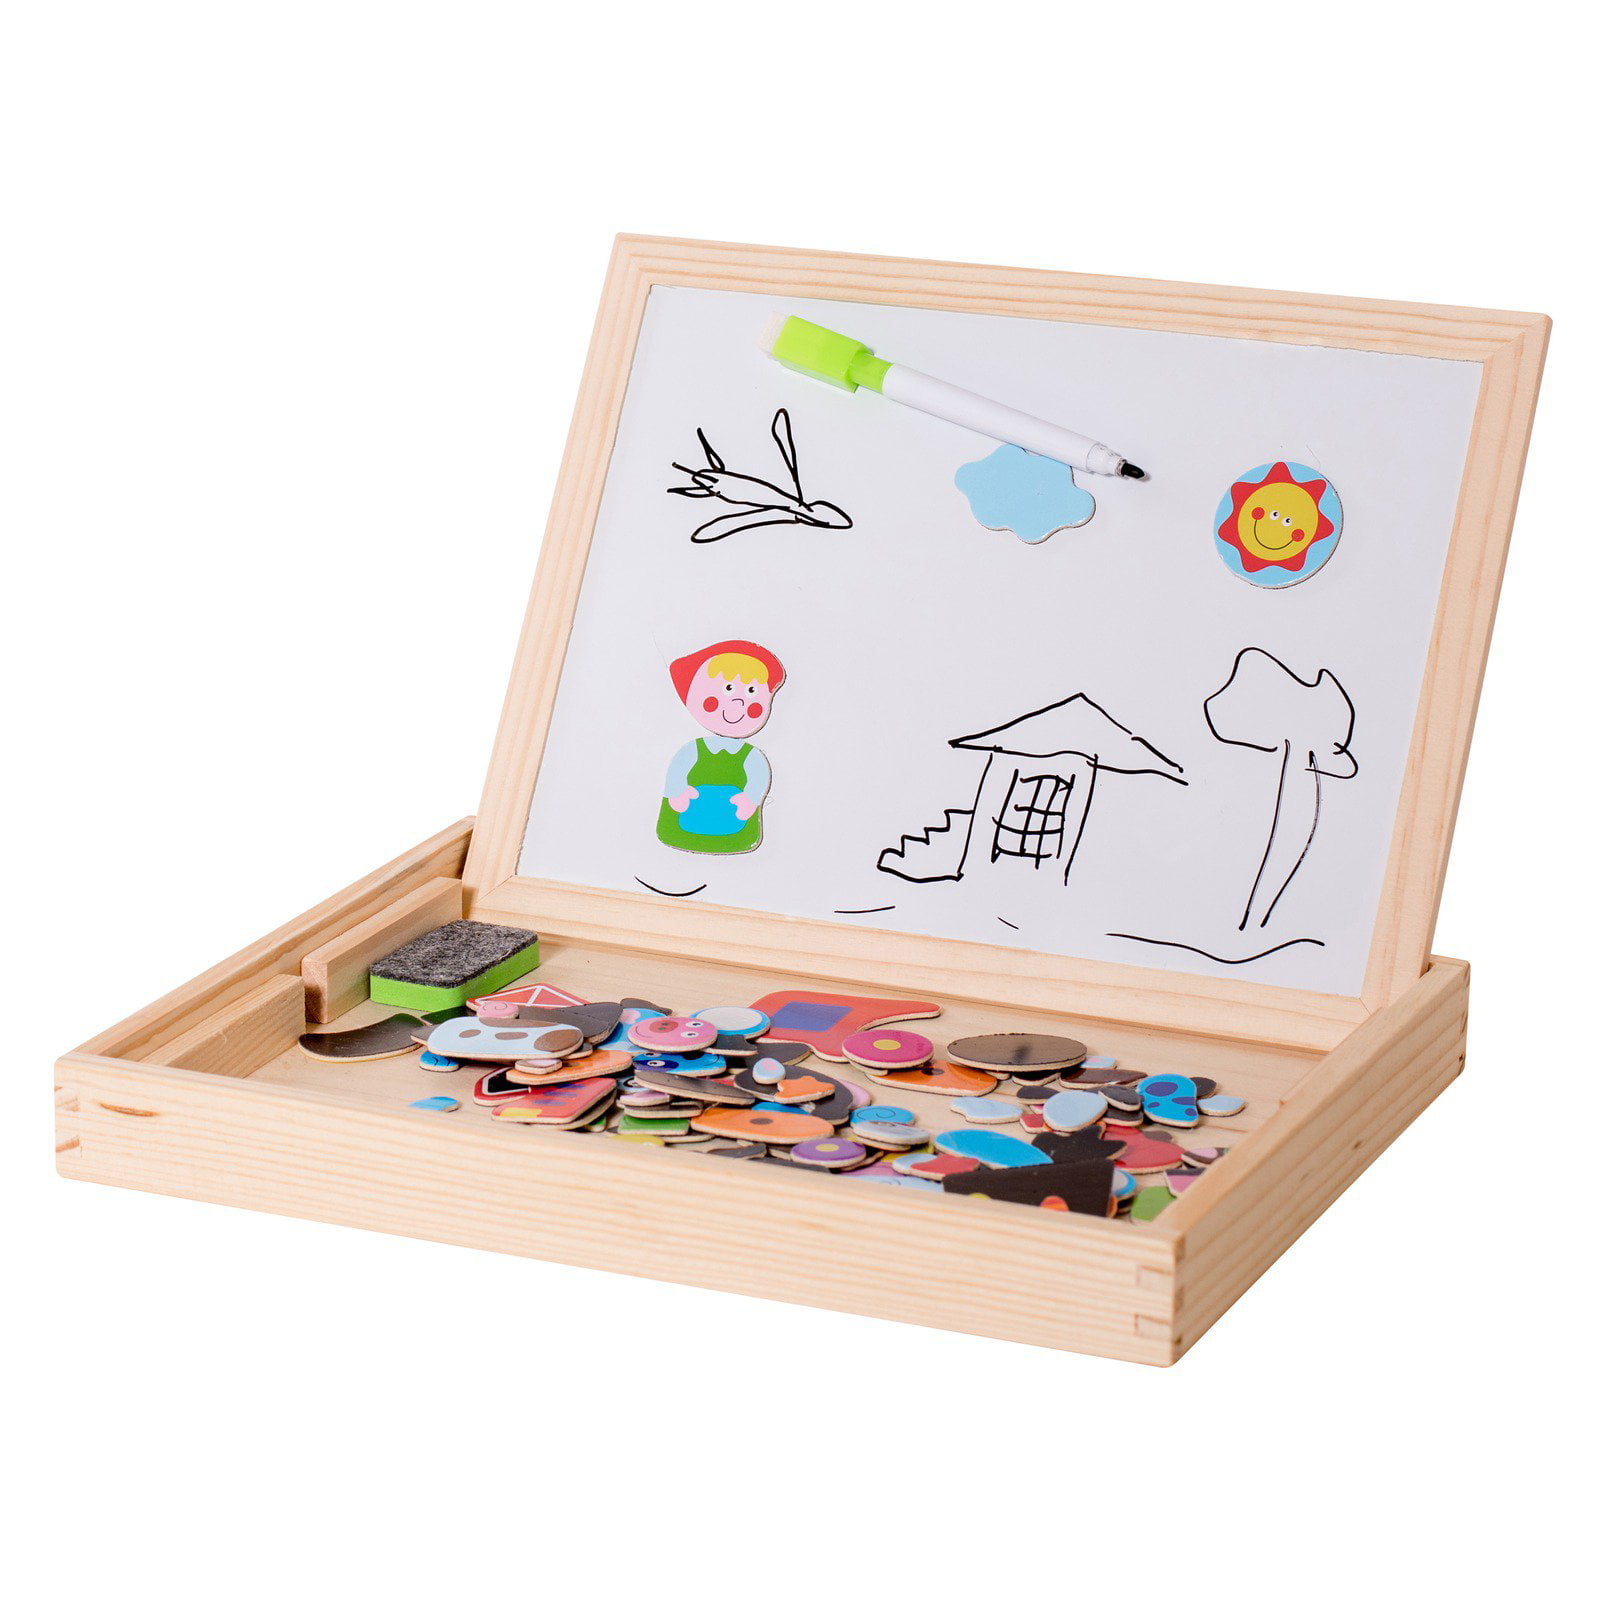 Eliiti Wooden Magnetic Easel Double Side Dry Erase Board for Kids 3 to 6 Years 